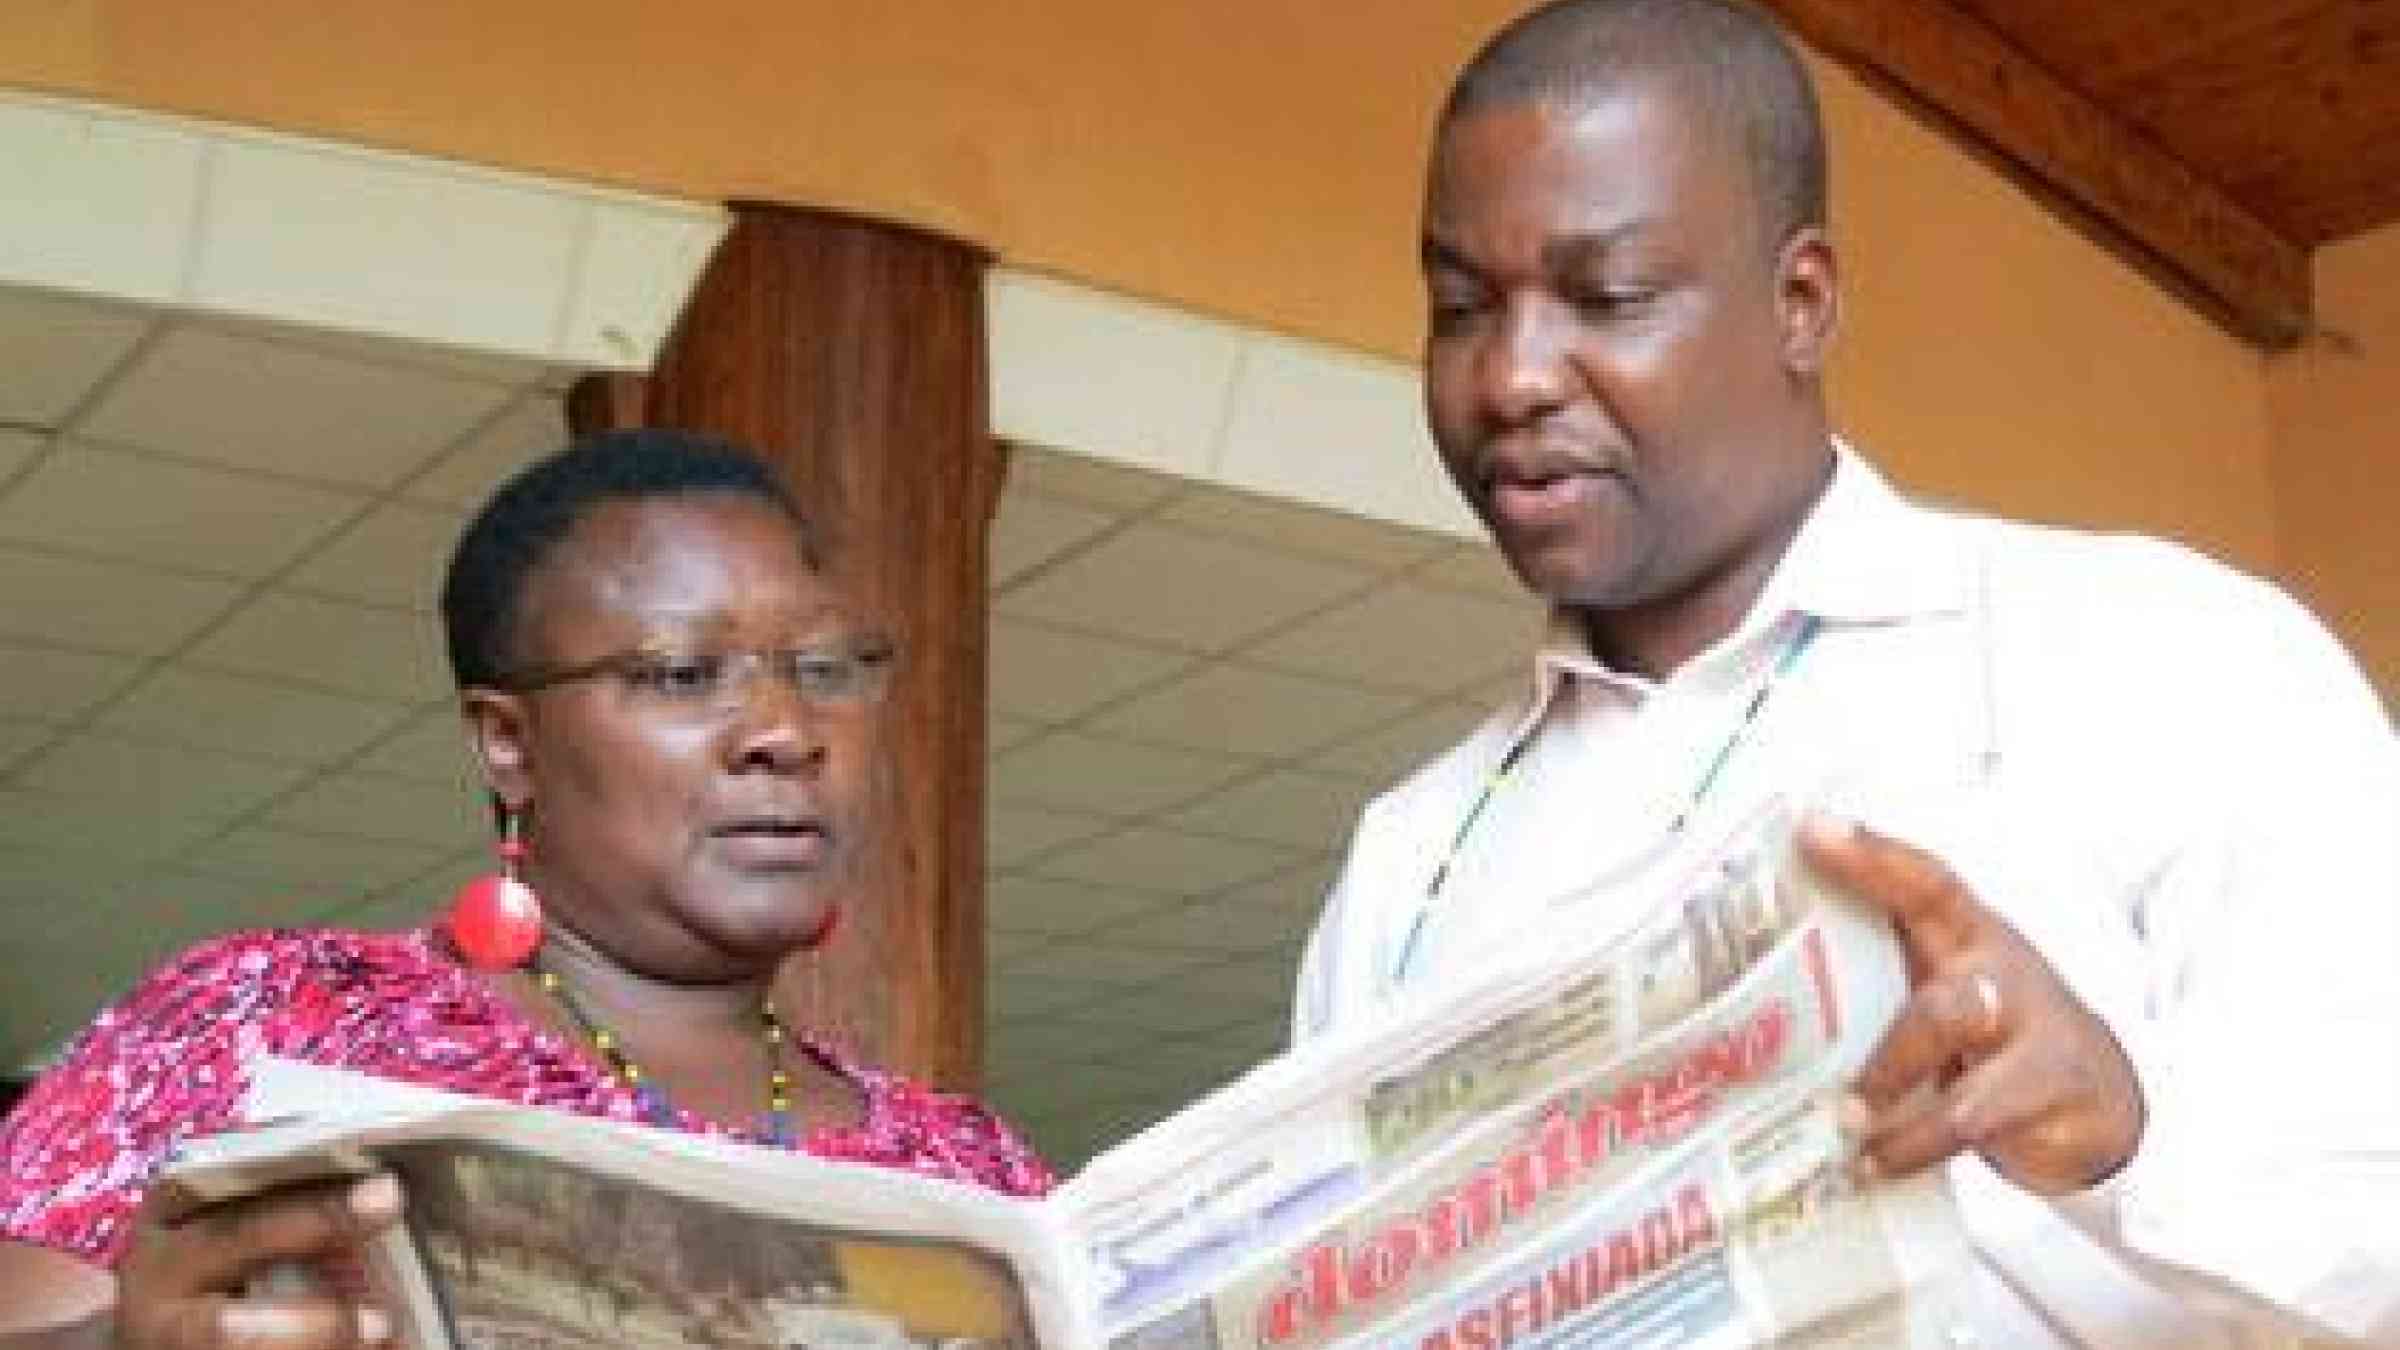 At the UNISDR media training in Arusha Tanzania today, Rachel Nakitare, Chief Producer - TV, Kenya Broadcasting Corporation, reviews the flood coverage in Mozambique's leading newsweekly "Domingo" with the newspaper's editor, Maputo-based Jorge Ernesto Rungo.